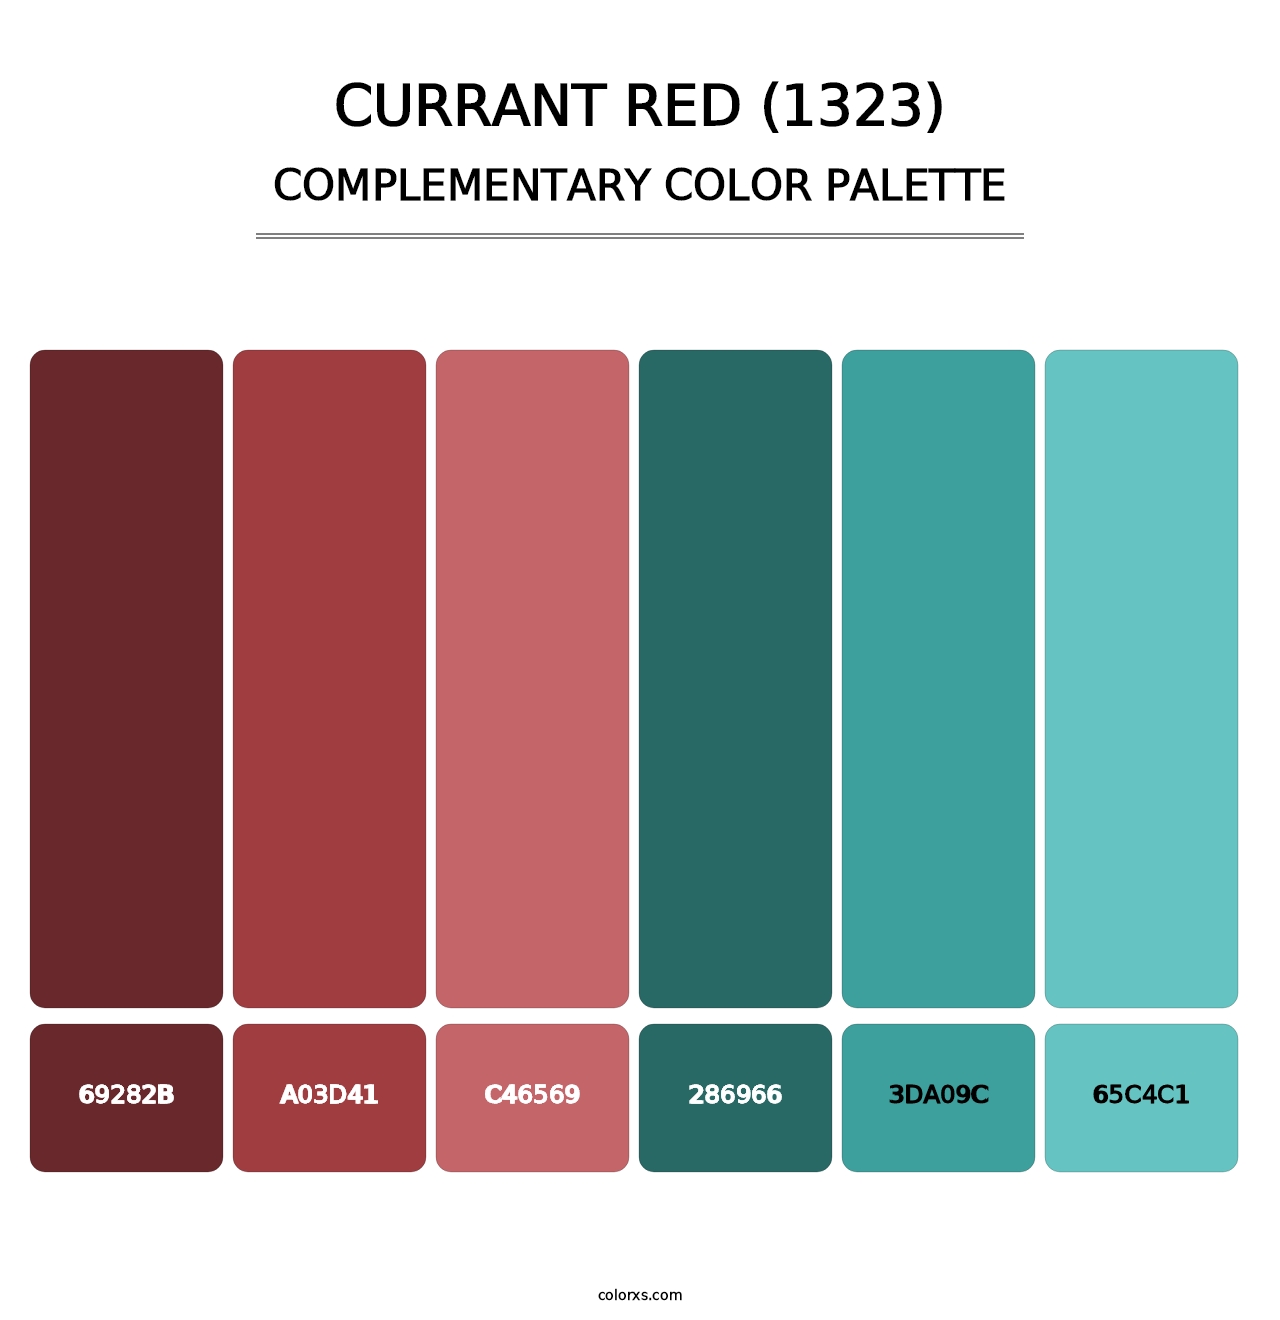 Currant Red (1323) - Complementary Color Palette